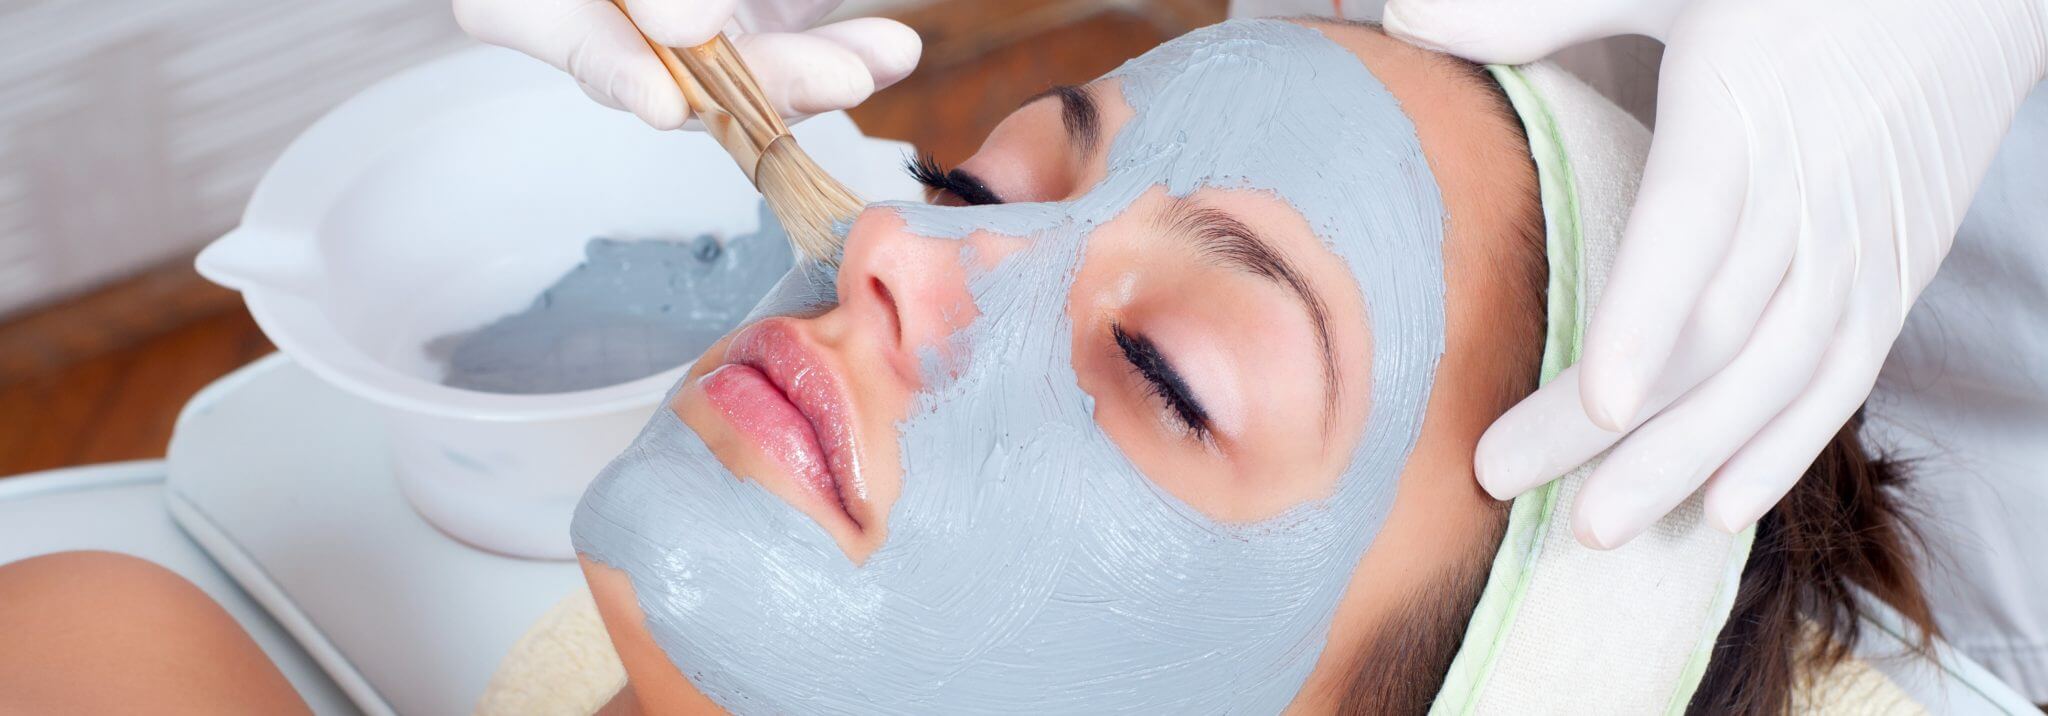 Blue Facial Mask Being Applied